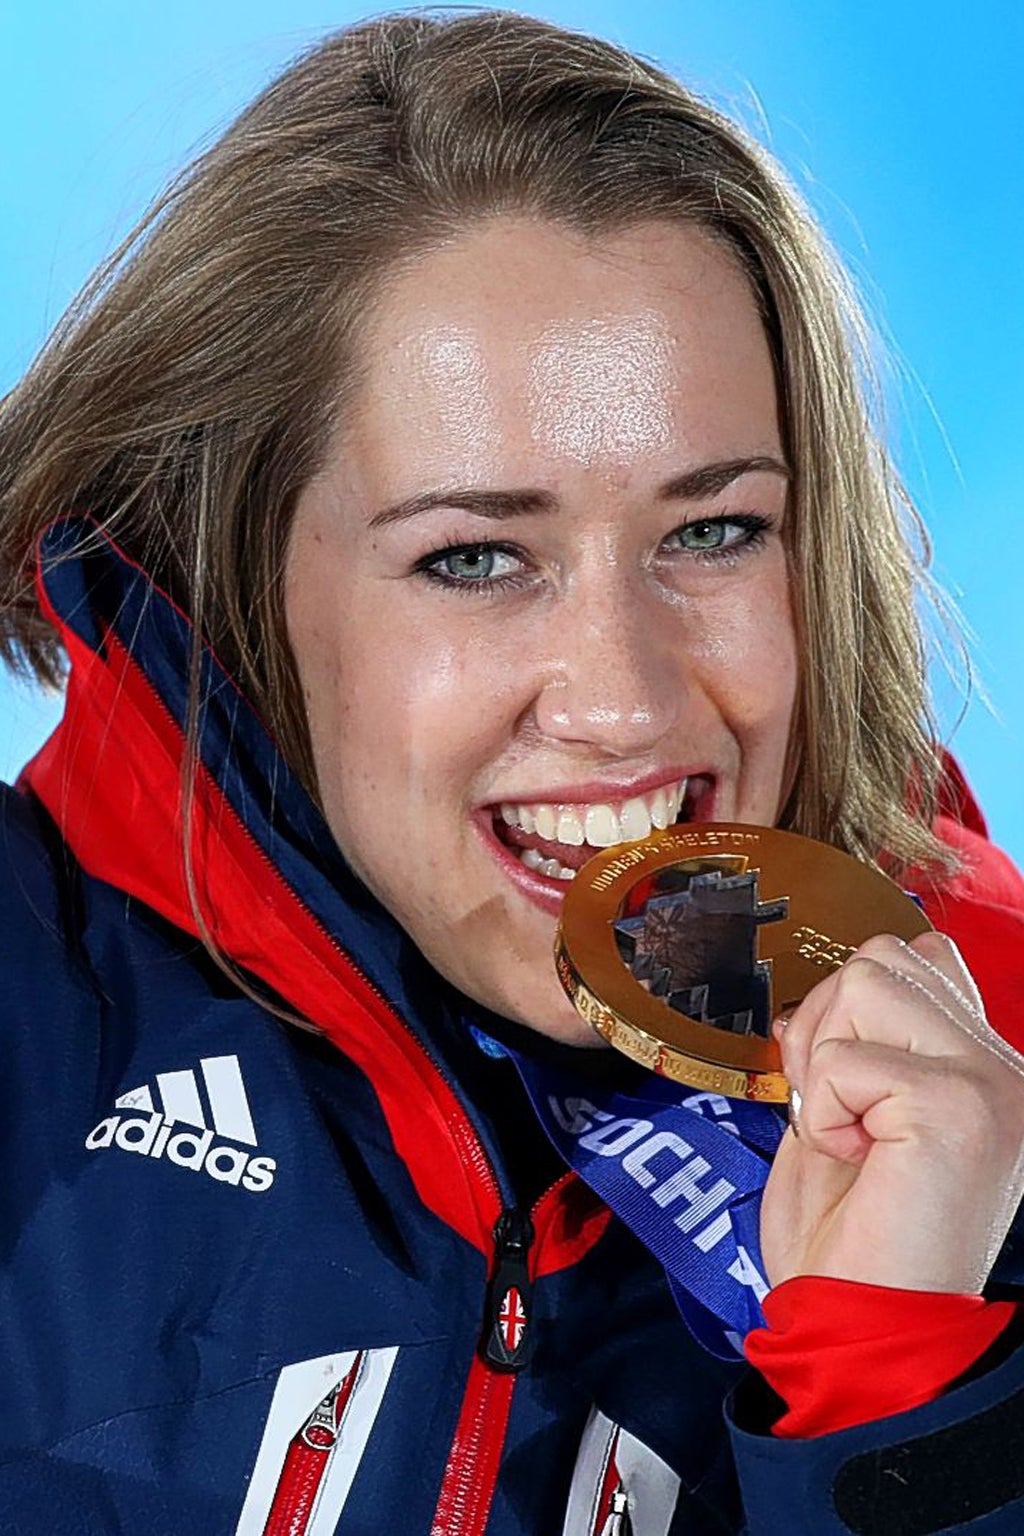 Added bite: Britain will never be at the forefront of winter sports but Lizzy Yarnold’s gold in Sochi is a credit to skeleton’s ambitious recruitment drive